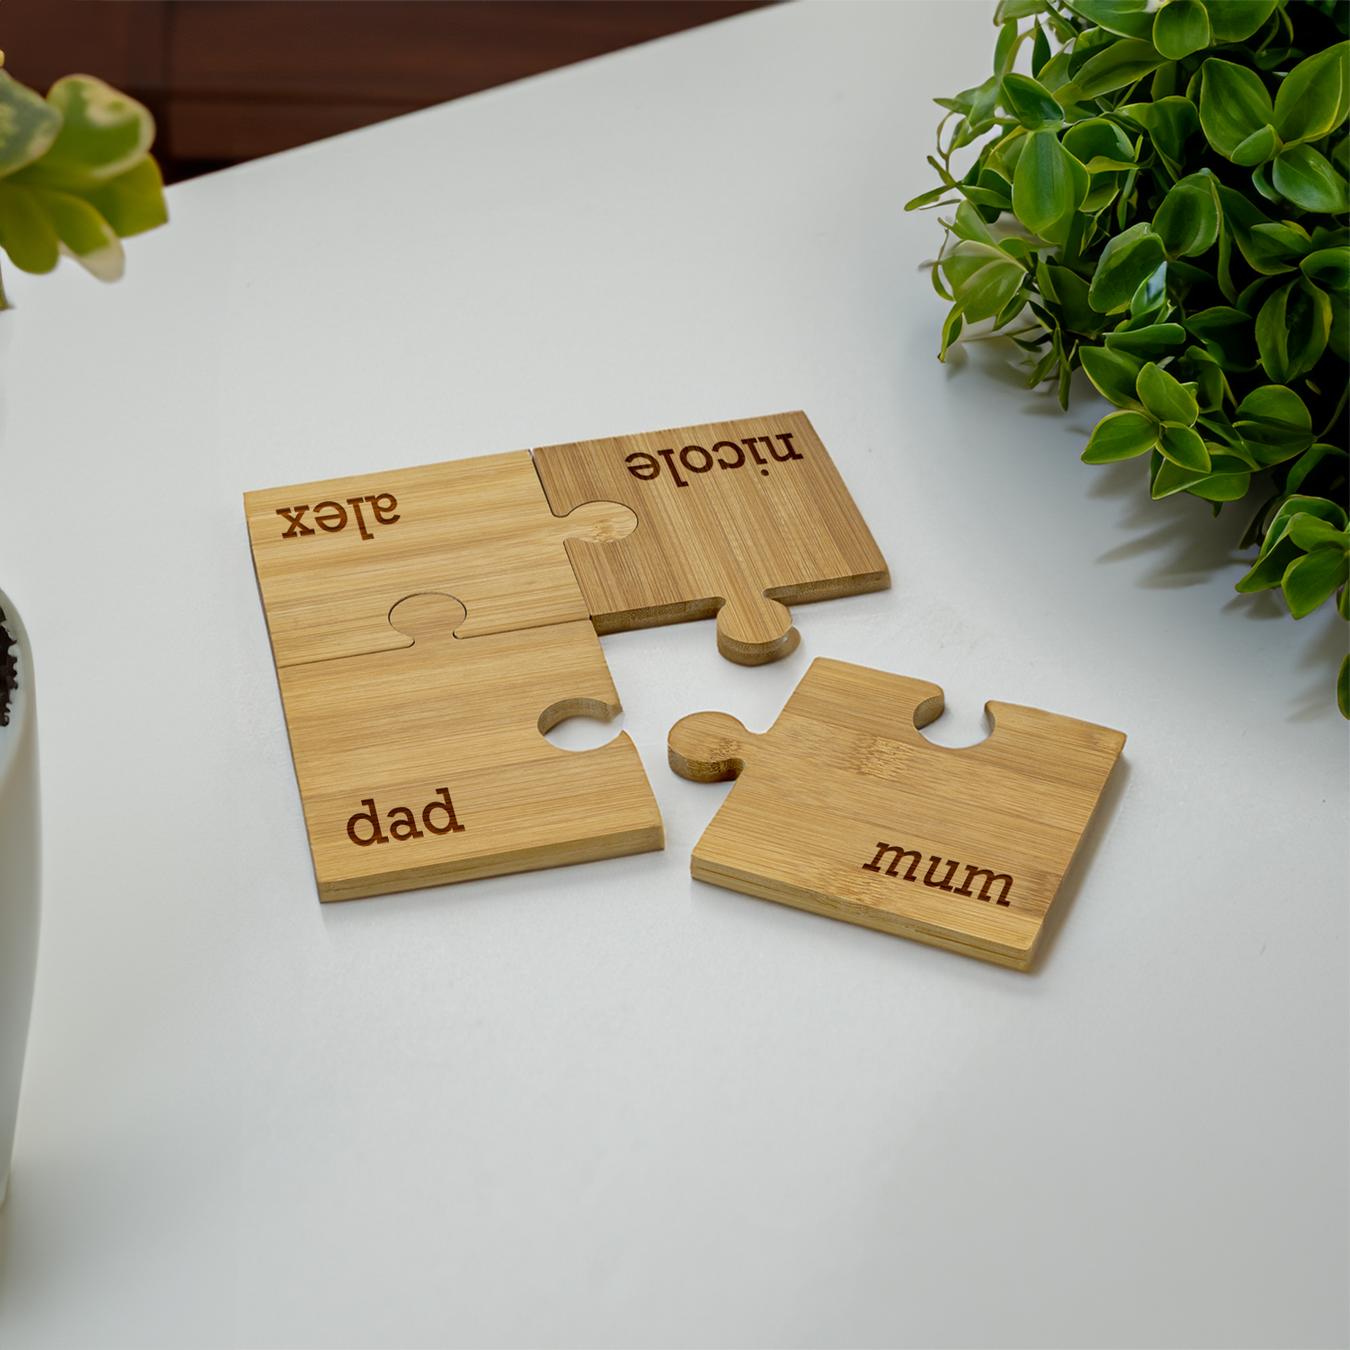 Homeware Gifts for Dad